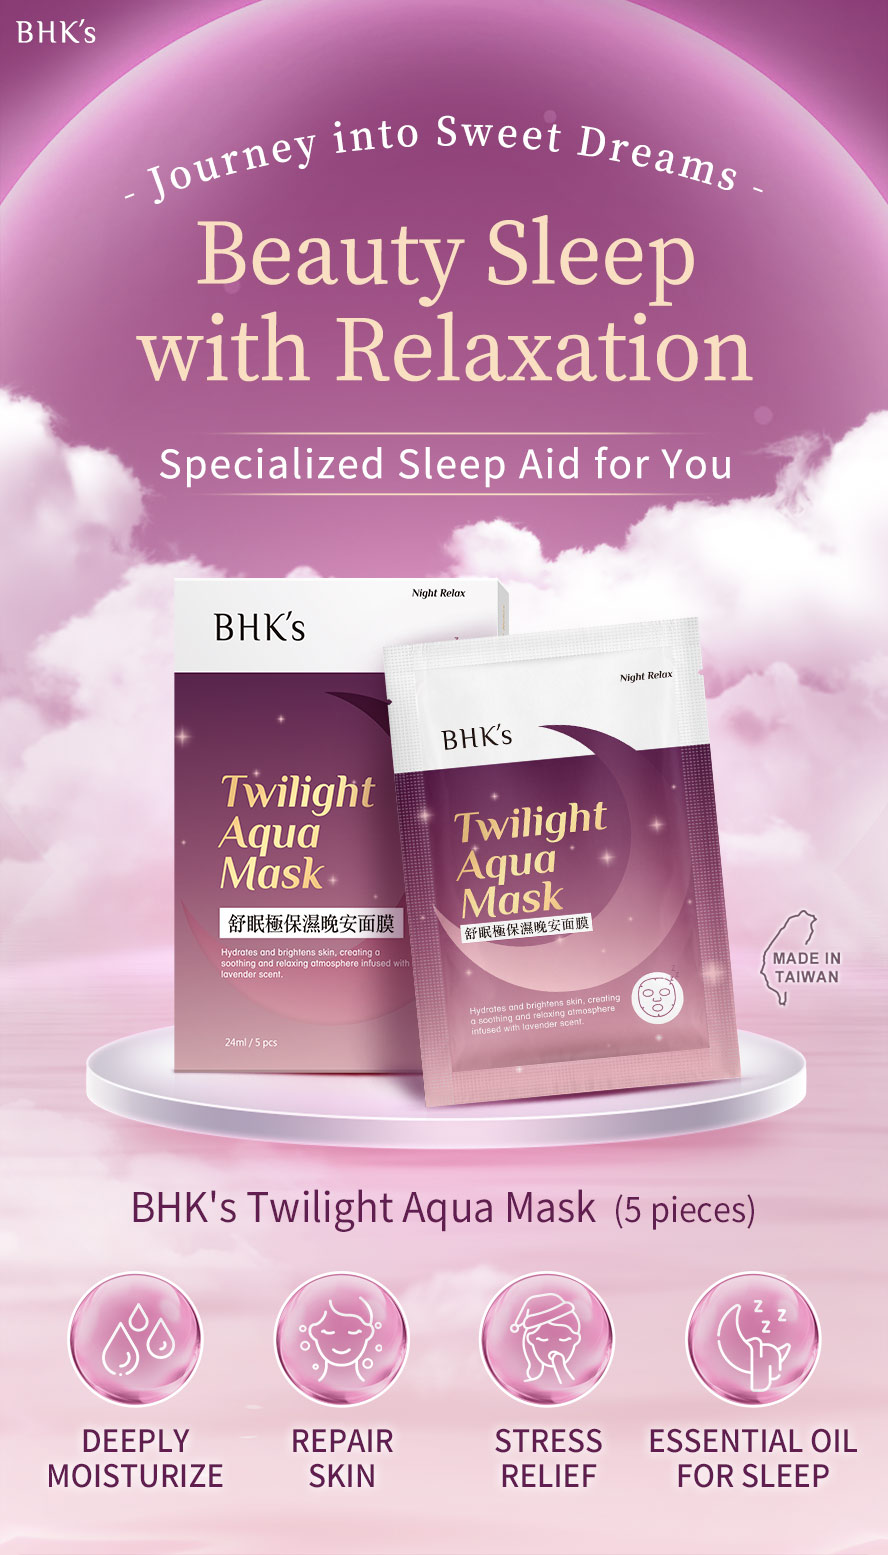 Moisturizing mask to repair skin and relax mind for better sleeping quality.